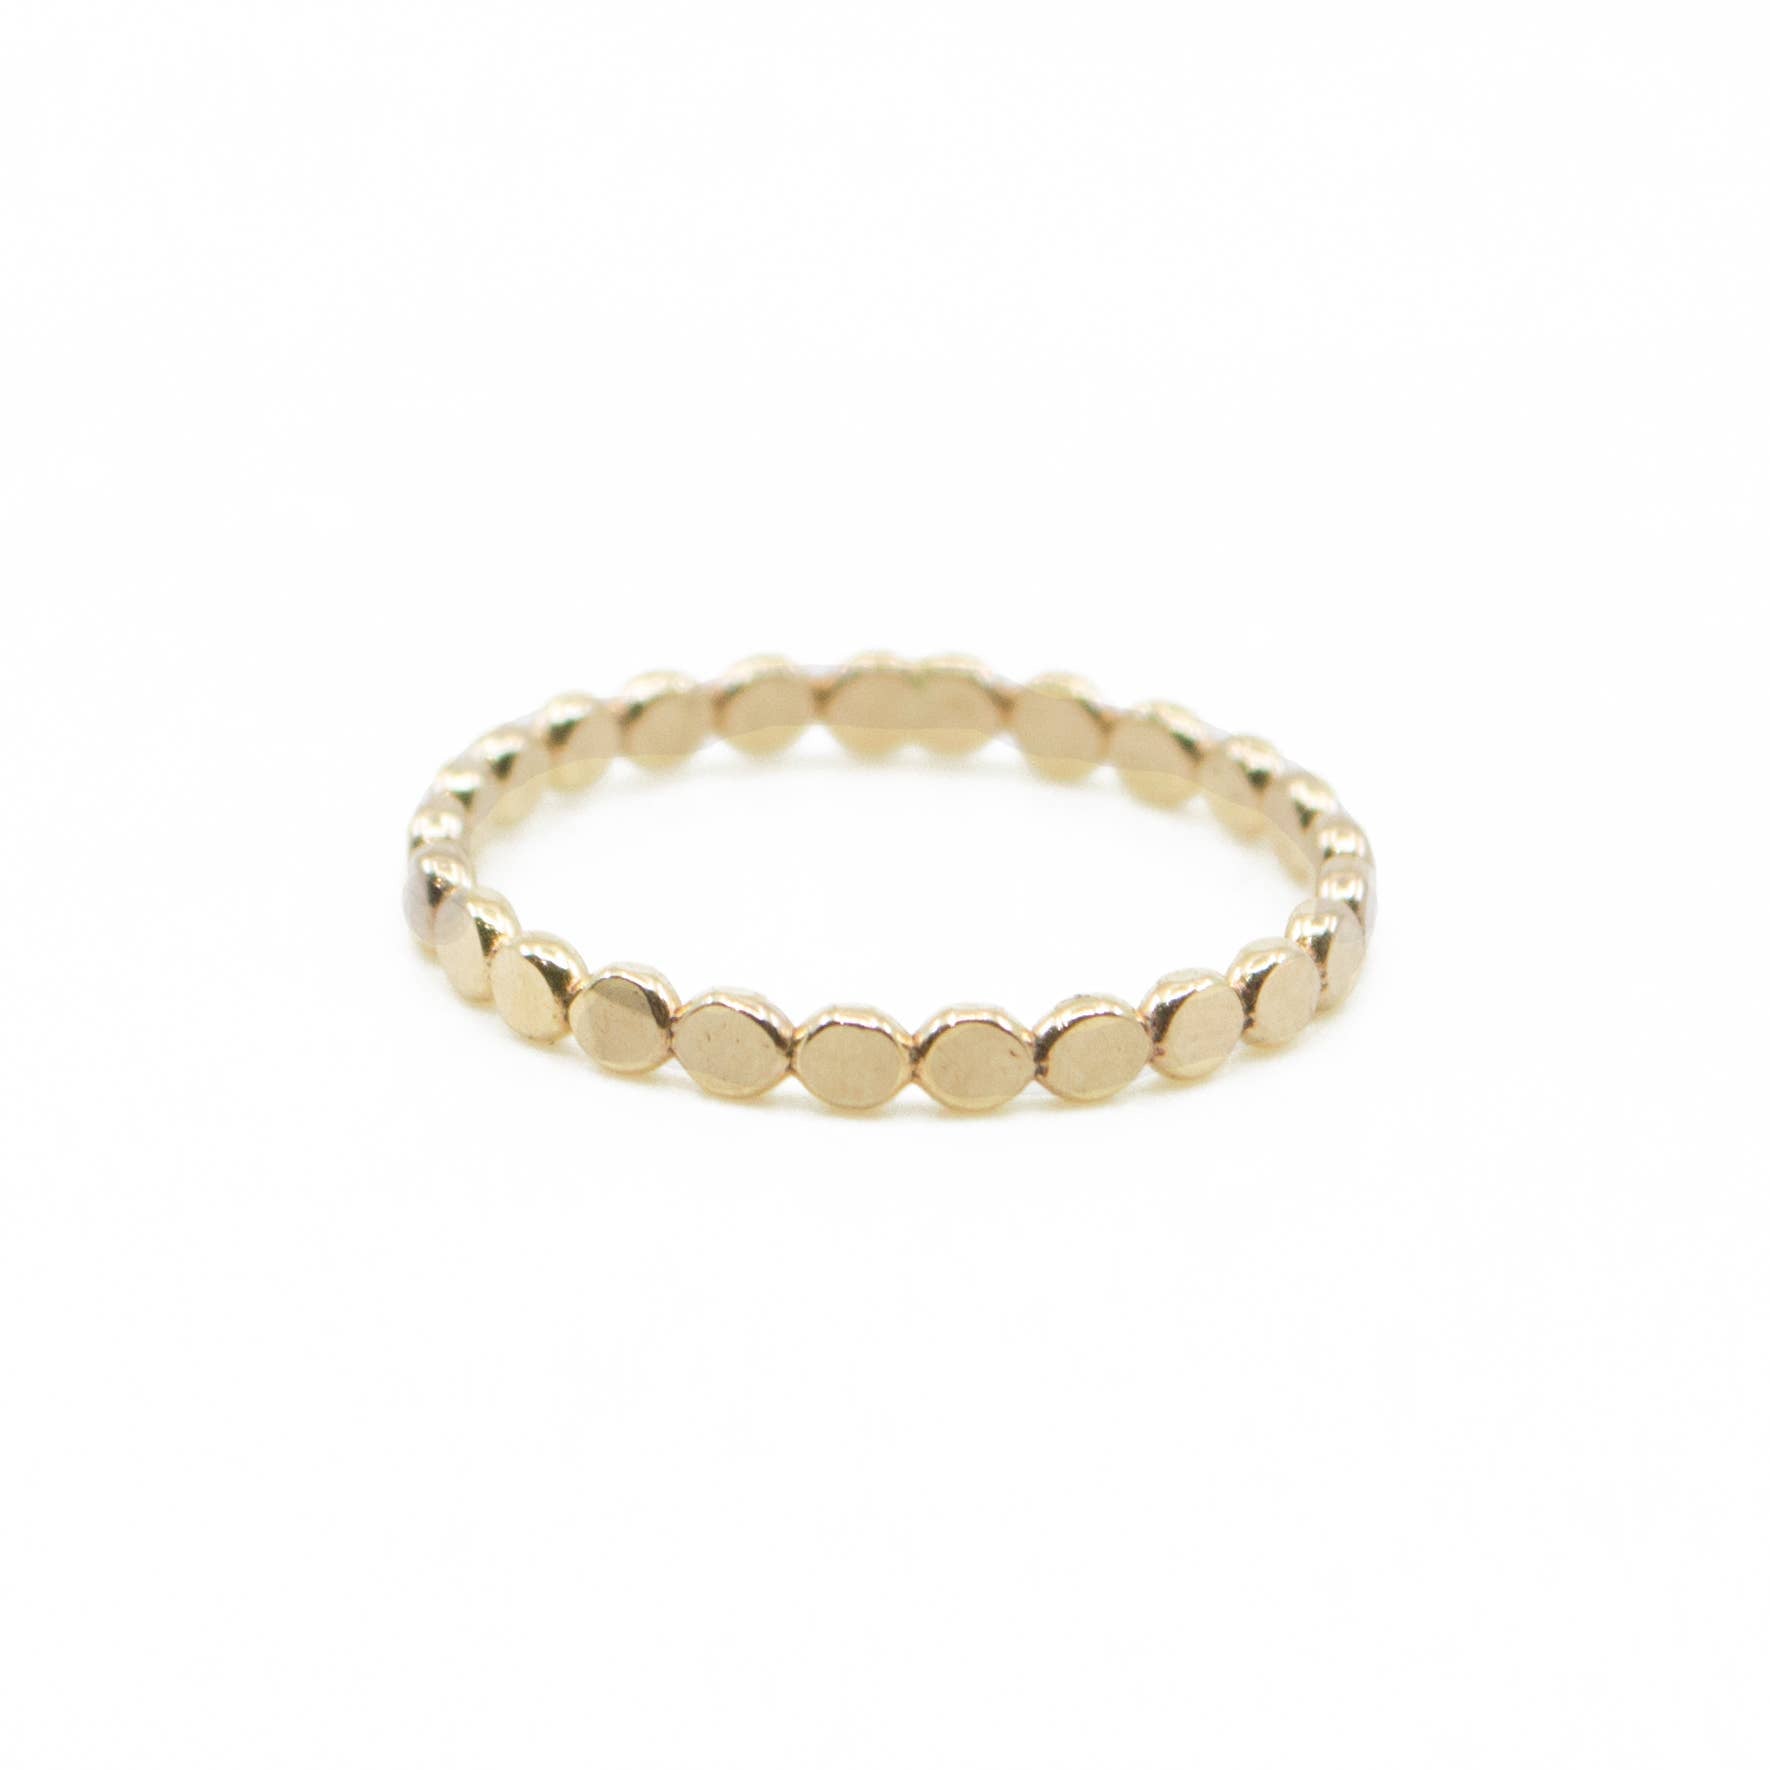 The Land of Salt - Coin Hammered Disc Stacking Ring in 14k Gold Filled